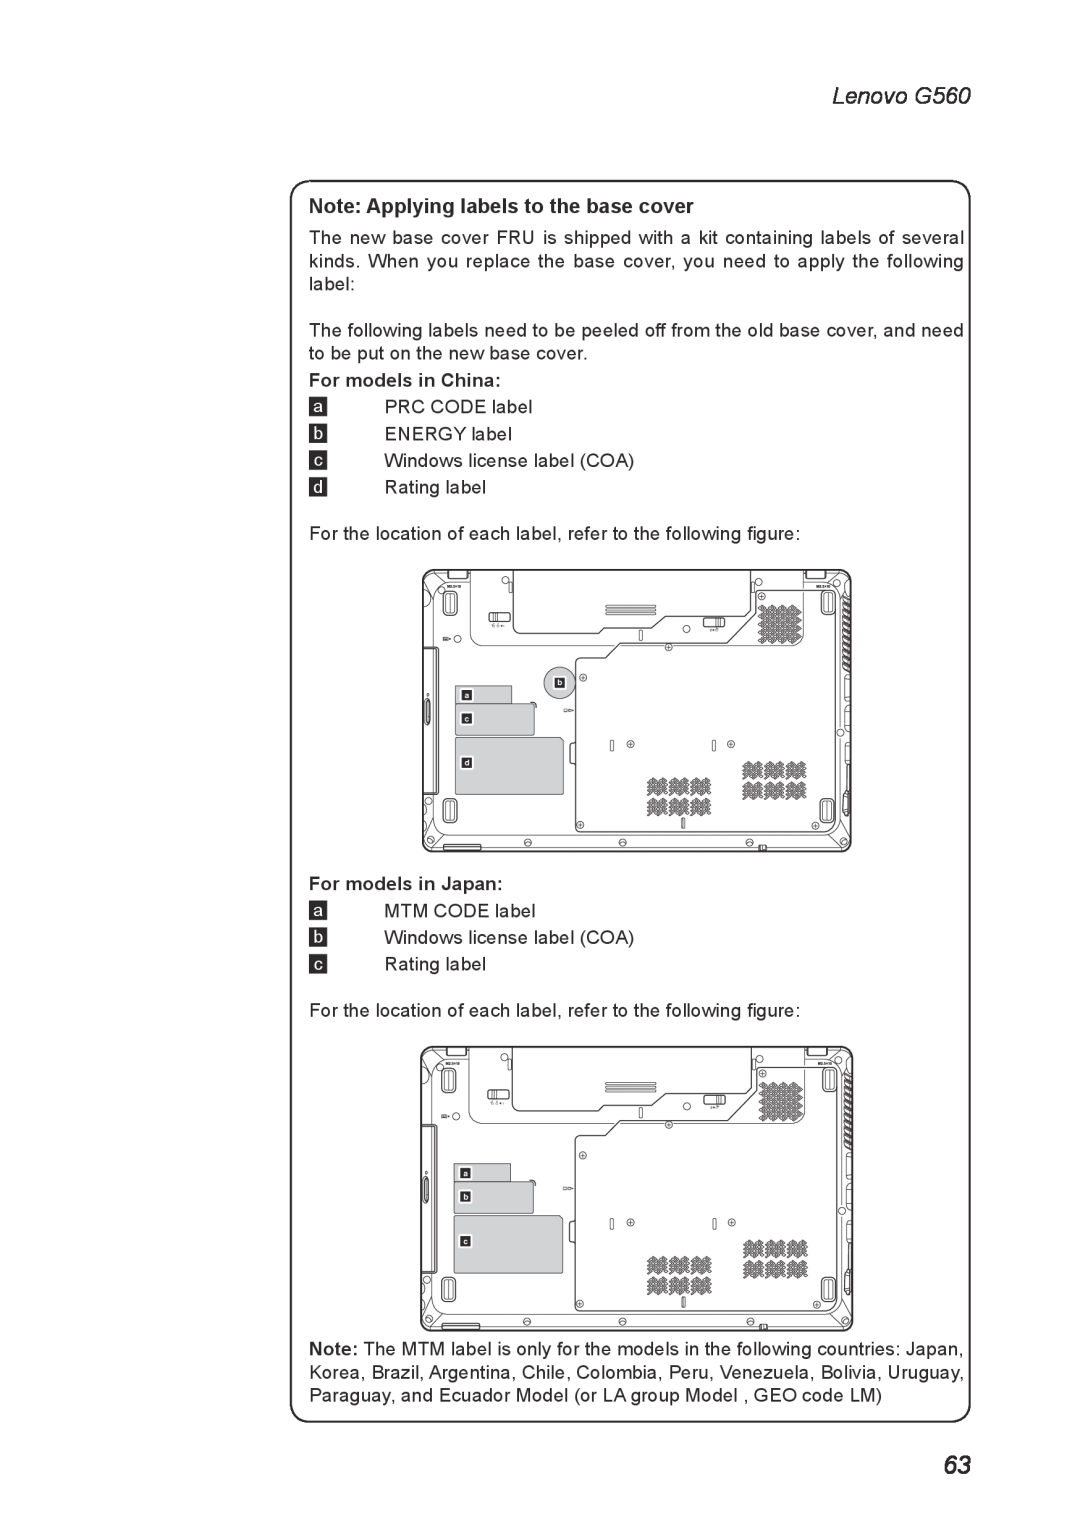 Lenovo manual Note Applying labels to the base cover, For models in China, For models in Japan, Lenovo G560 